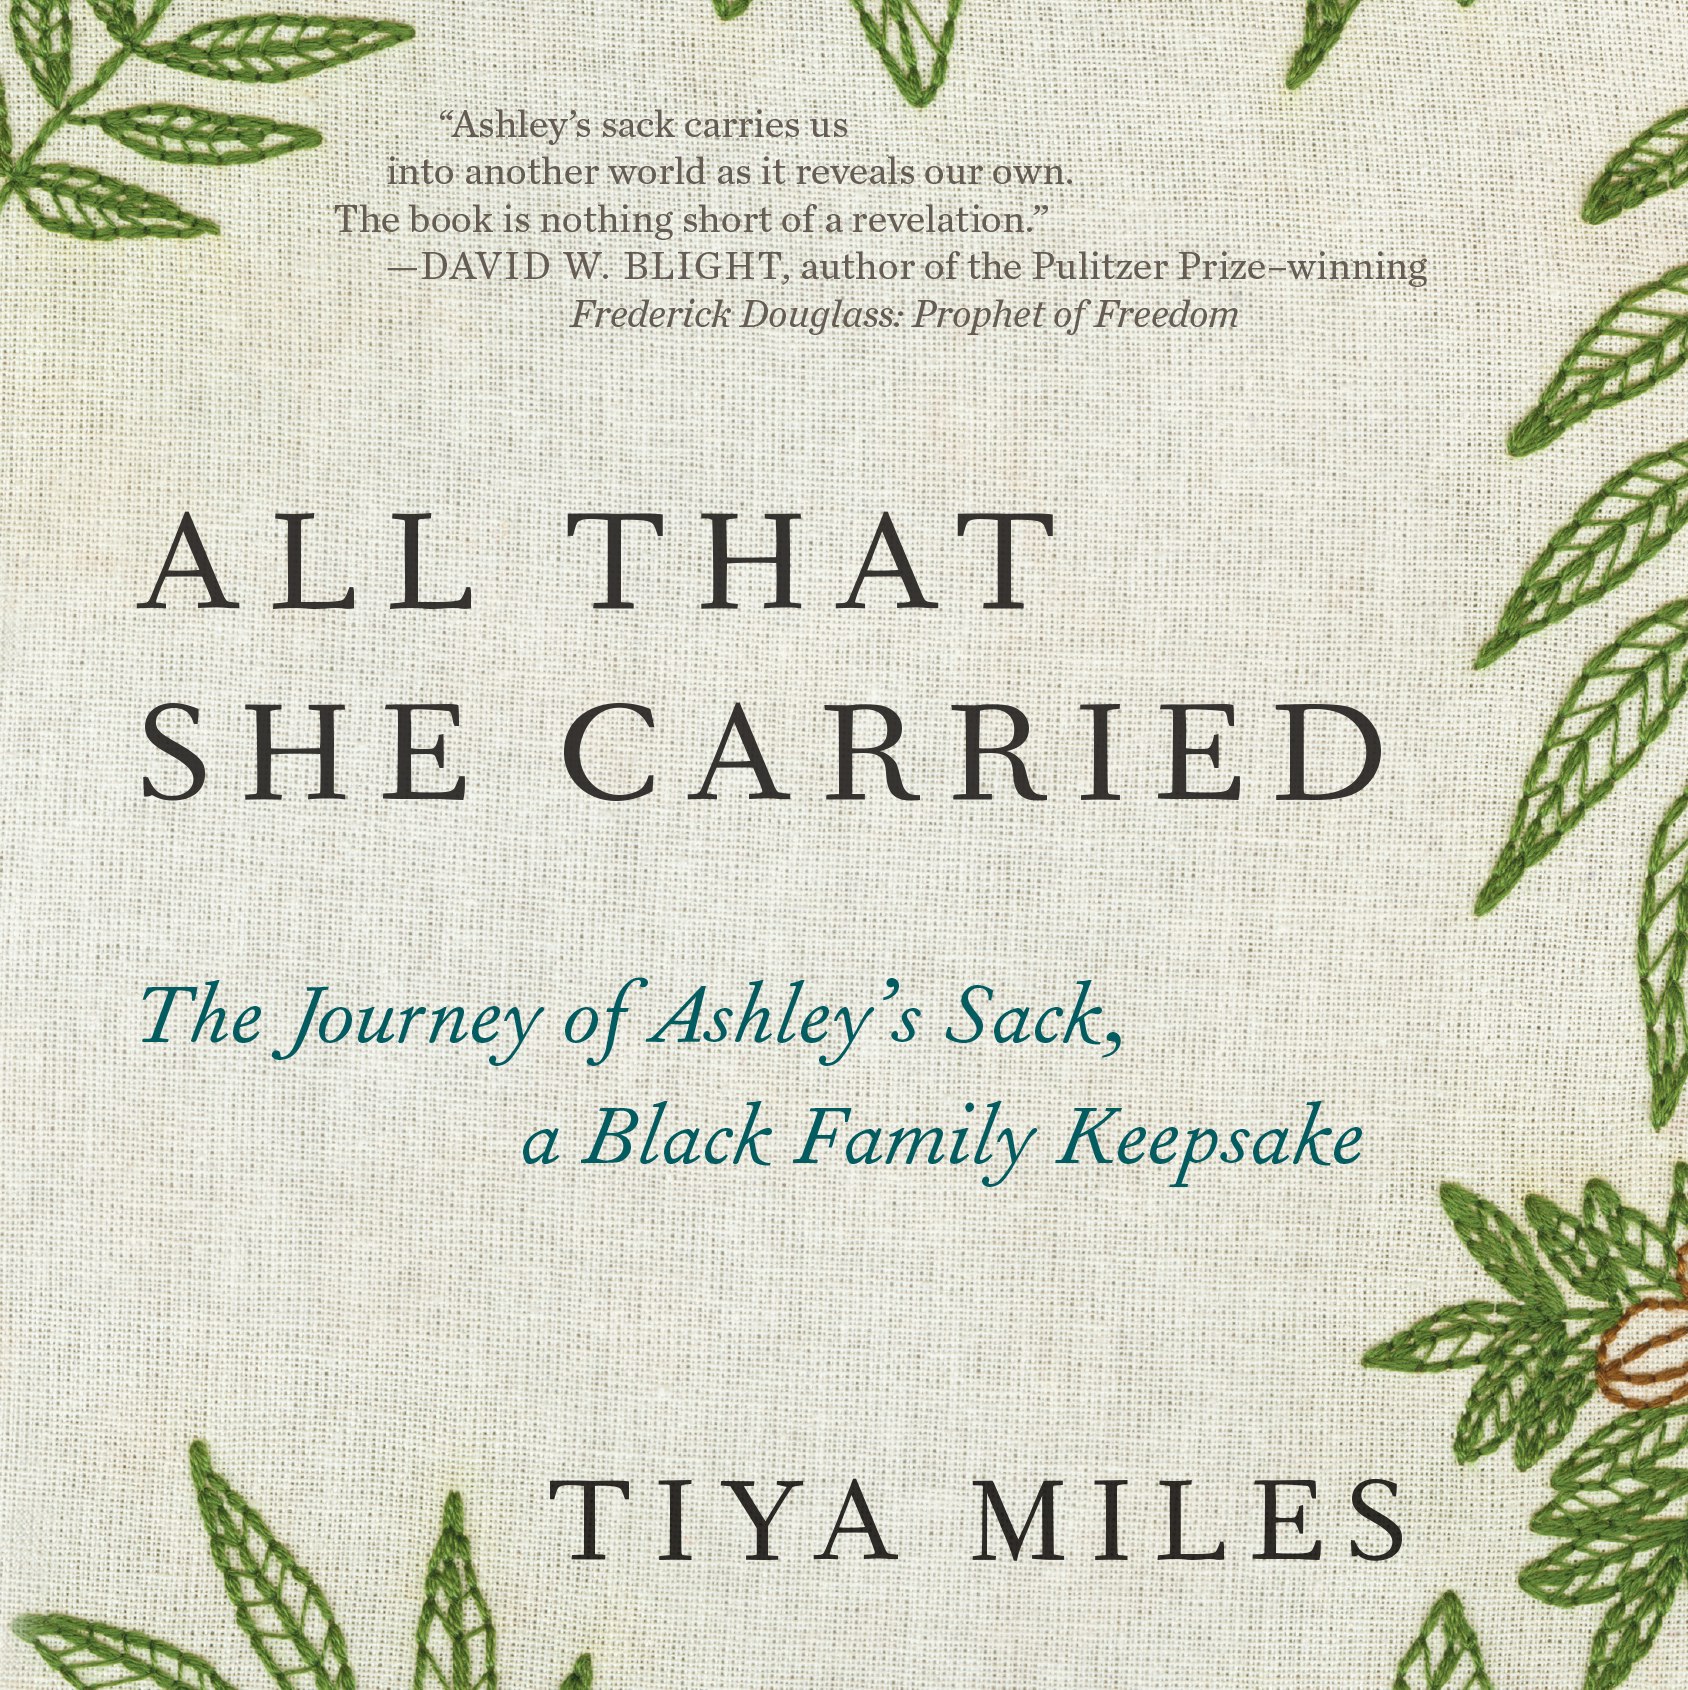 Cover of All That She Carried, by Tiya Miles